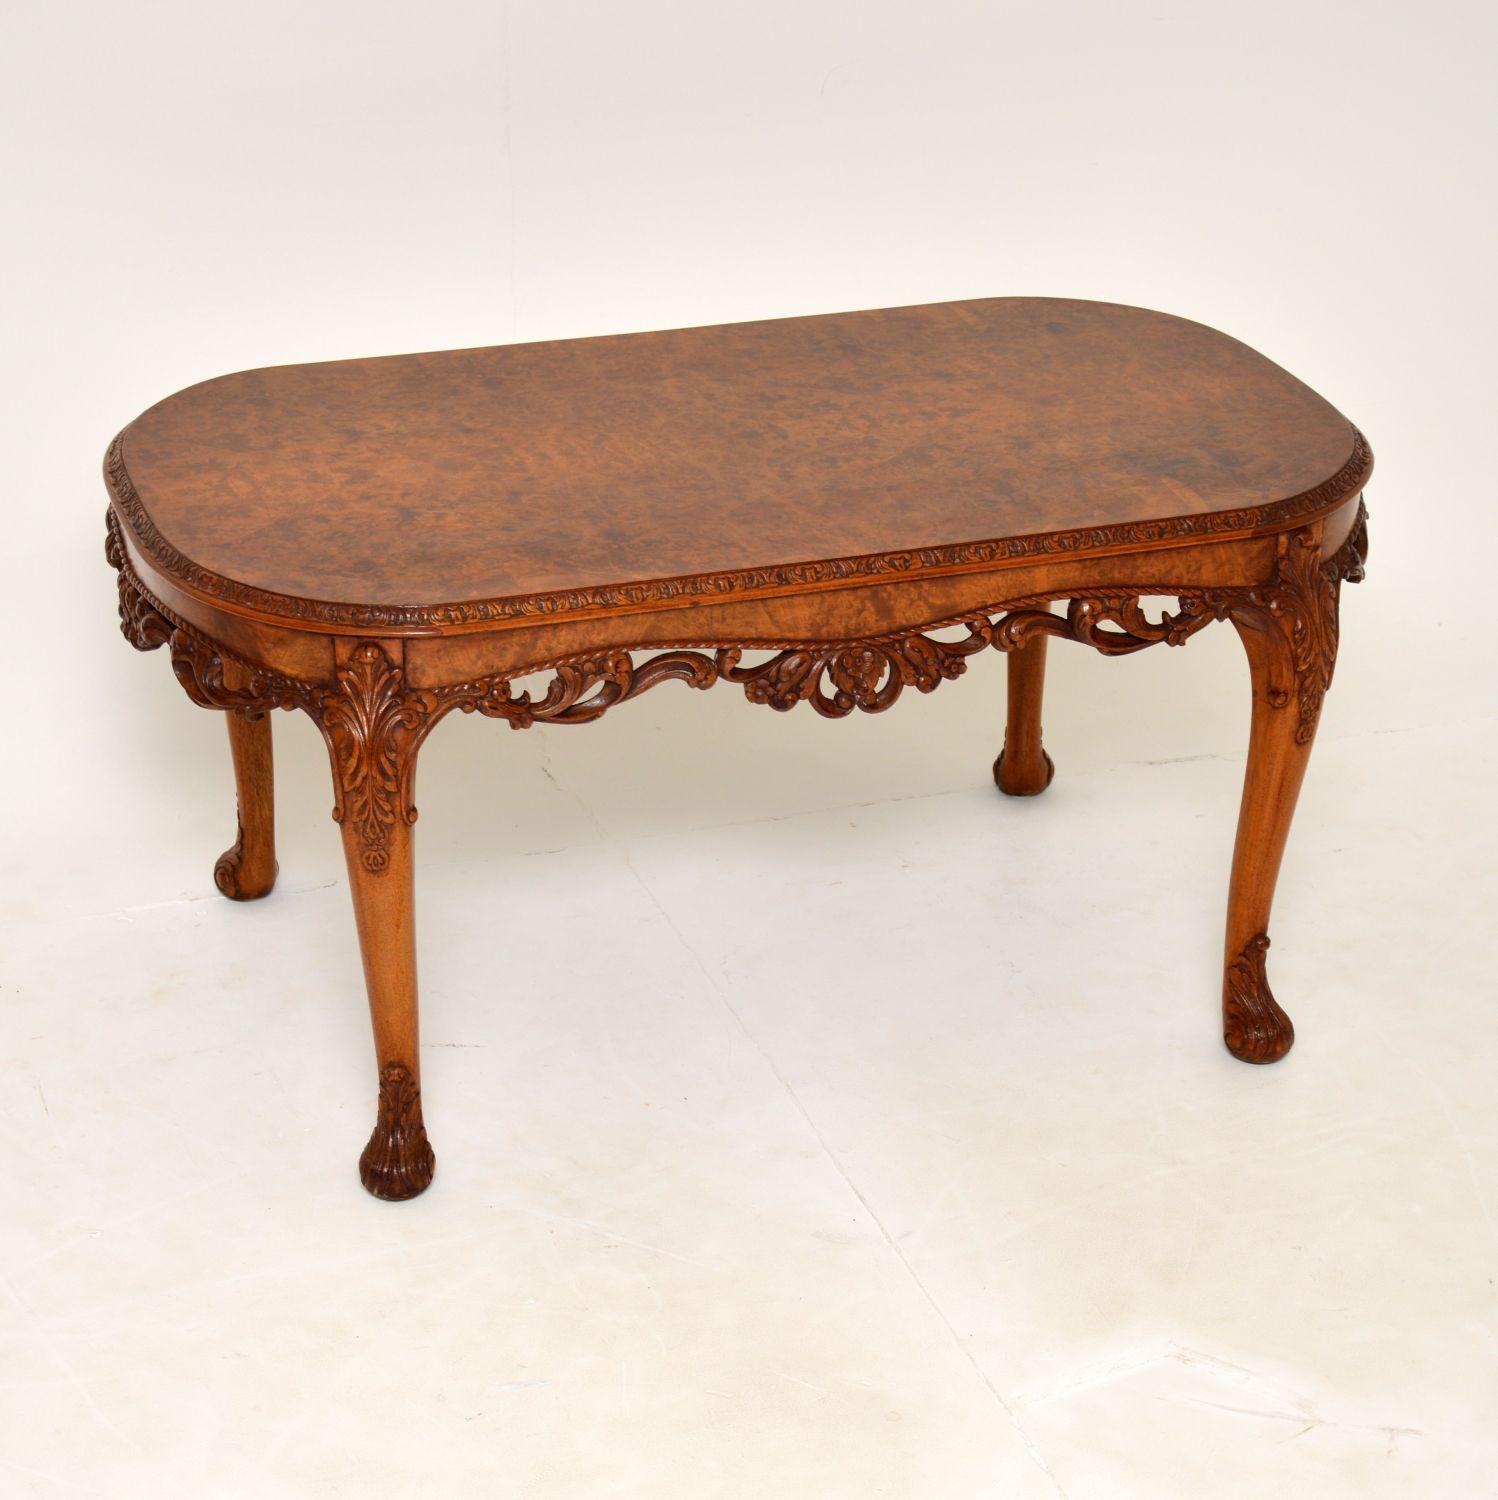 A fantastic antique burr walnut coffee table of the highest order. This was made made in England, it dates from the 1930’s.

The quality is outstanding, this is a great size and has absolutely gorgeous carving all over the edges and legs. The top